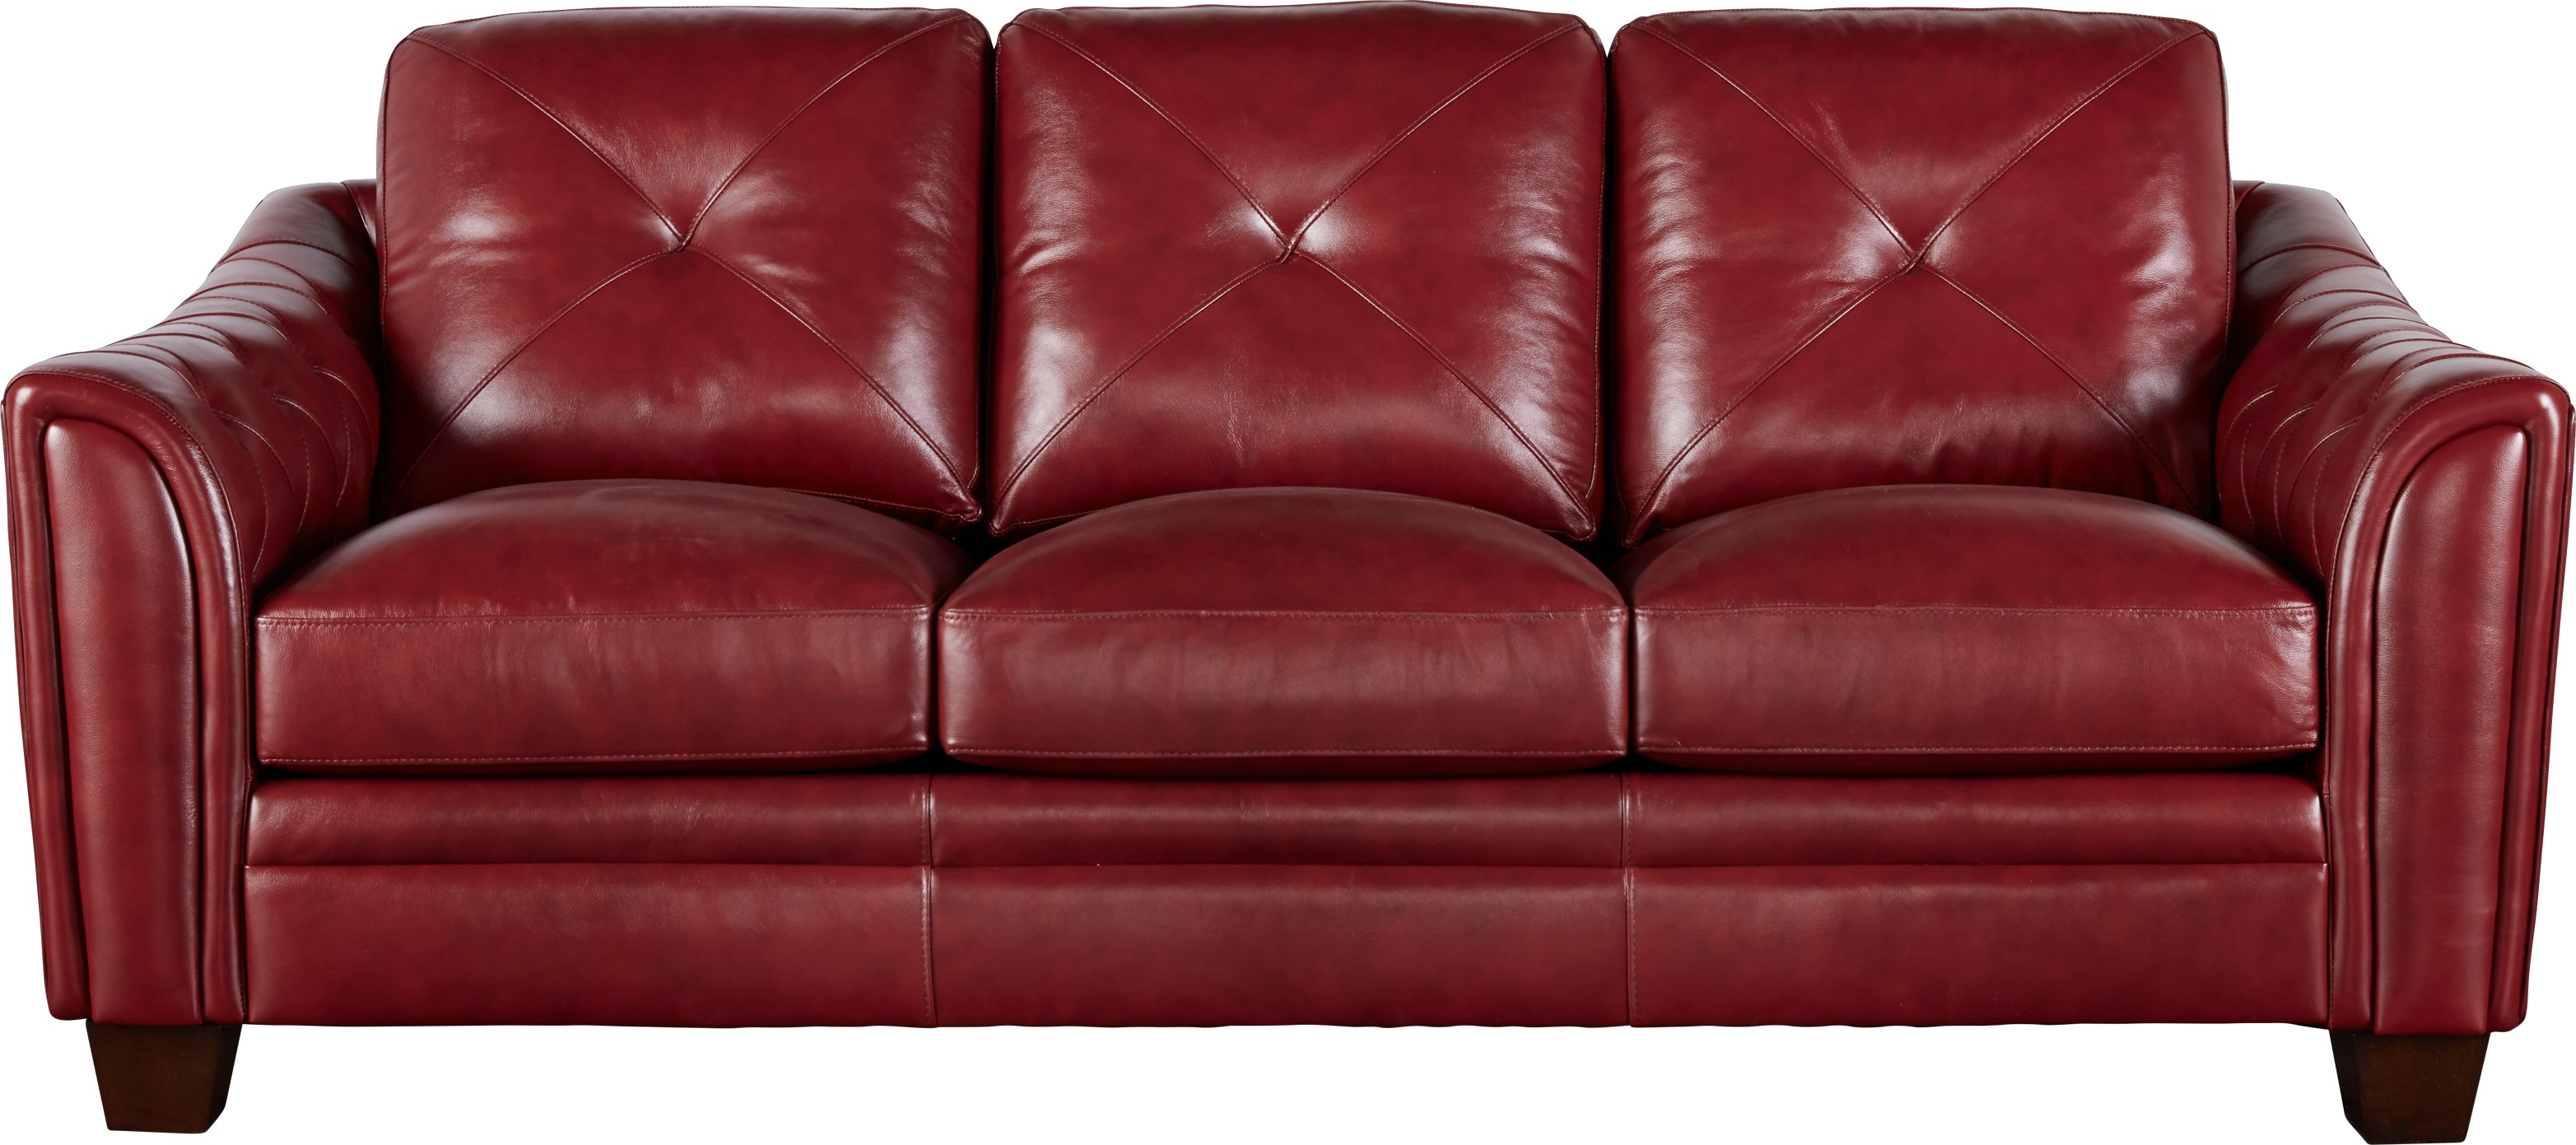 traditional red leather sofa